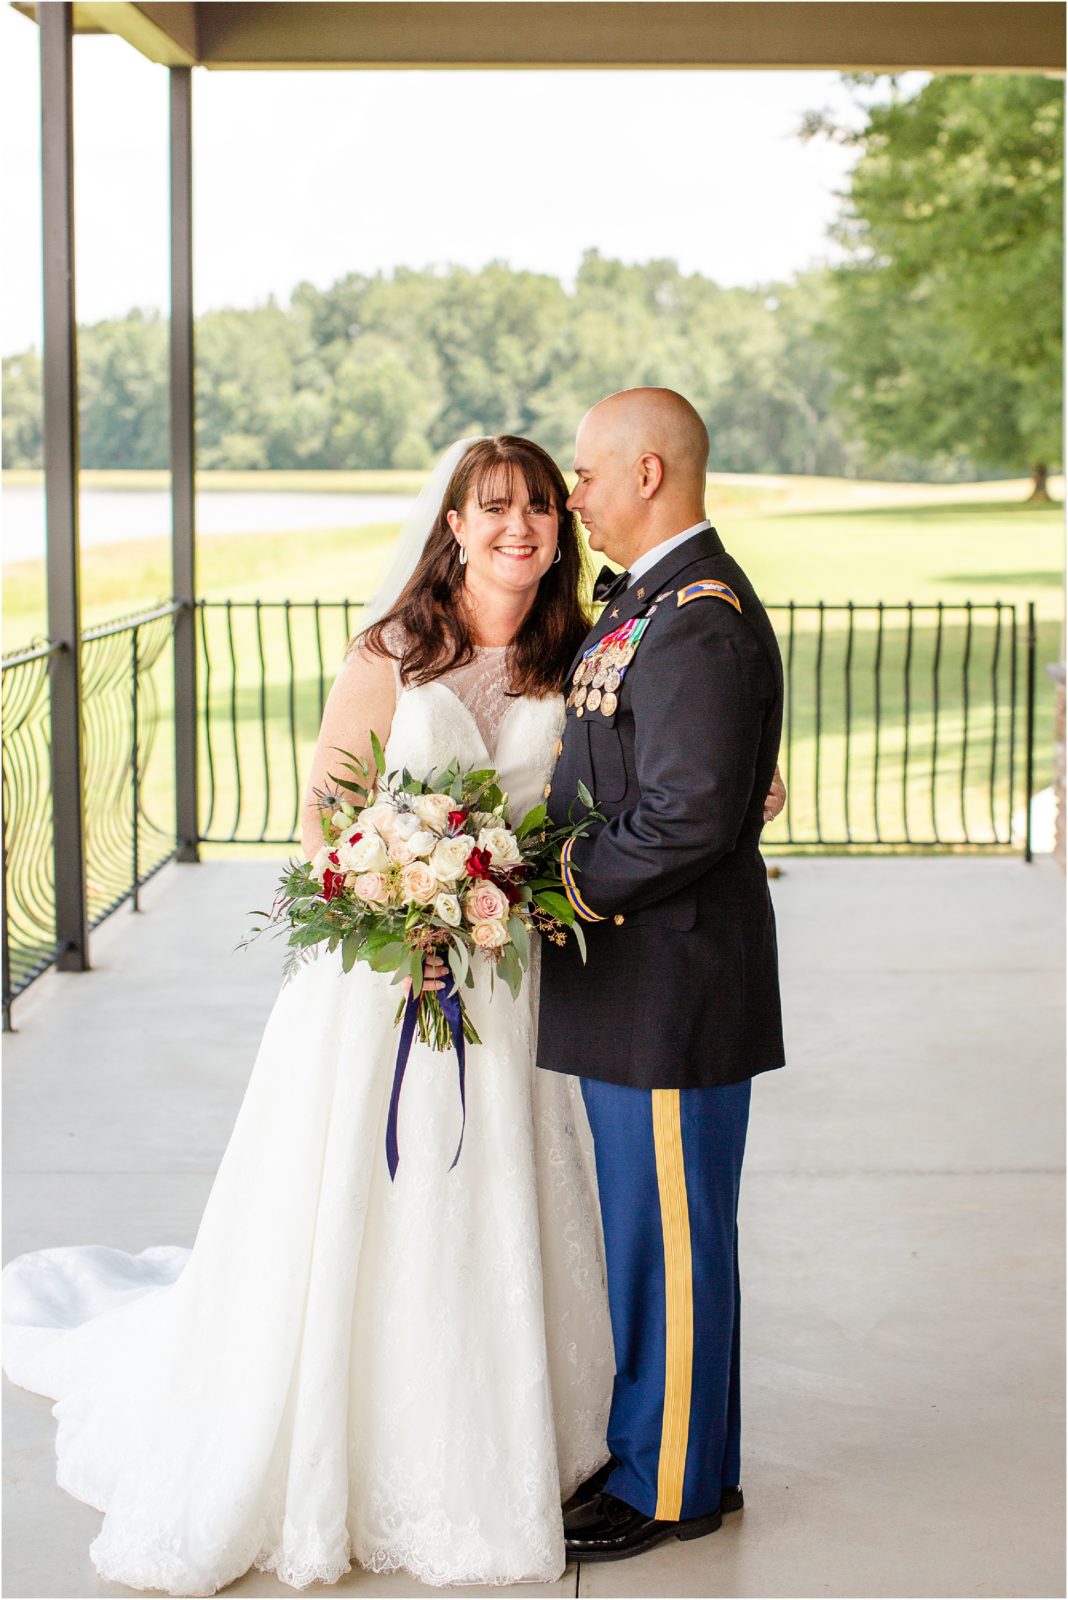 Man in military uniform with bride